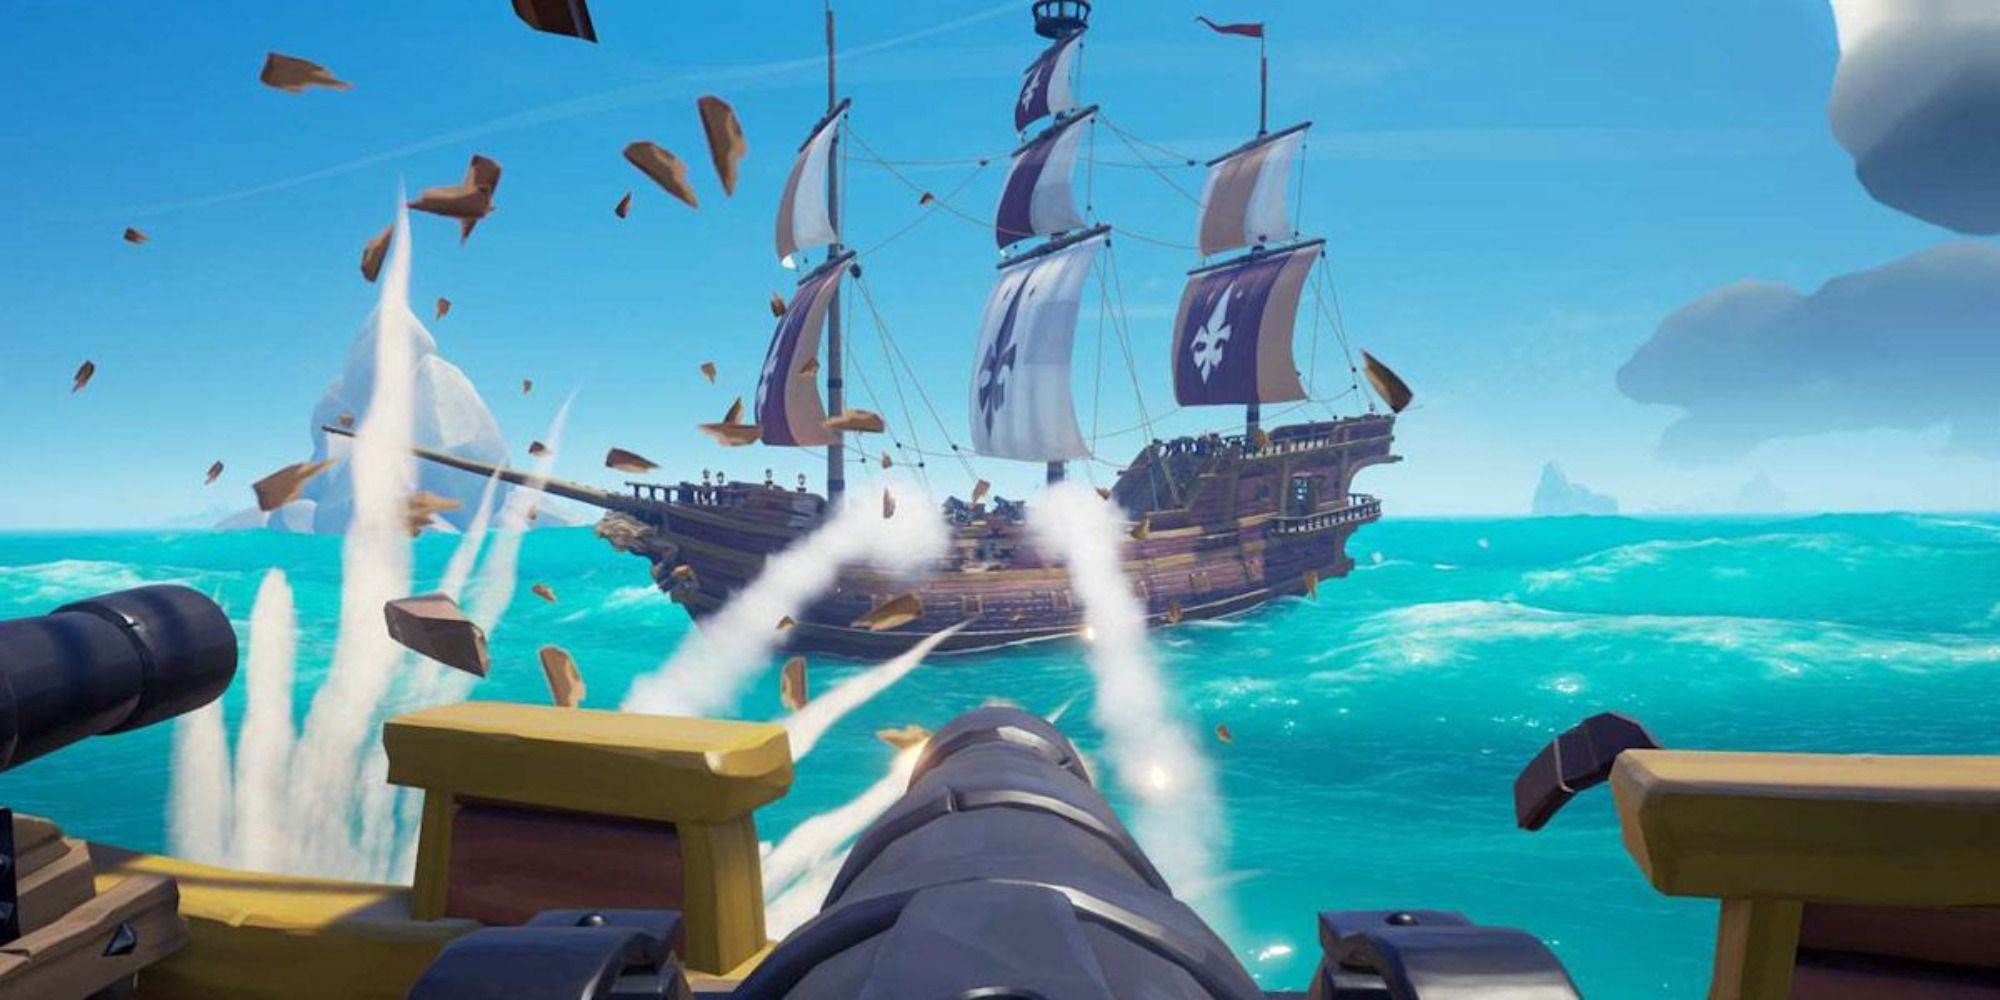 A sea of ​​thieves firing cannons at another ship